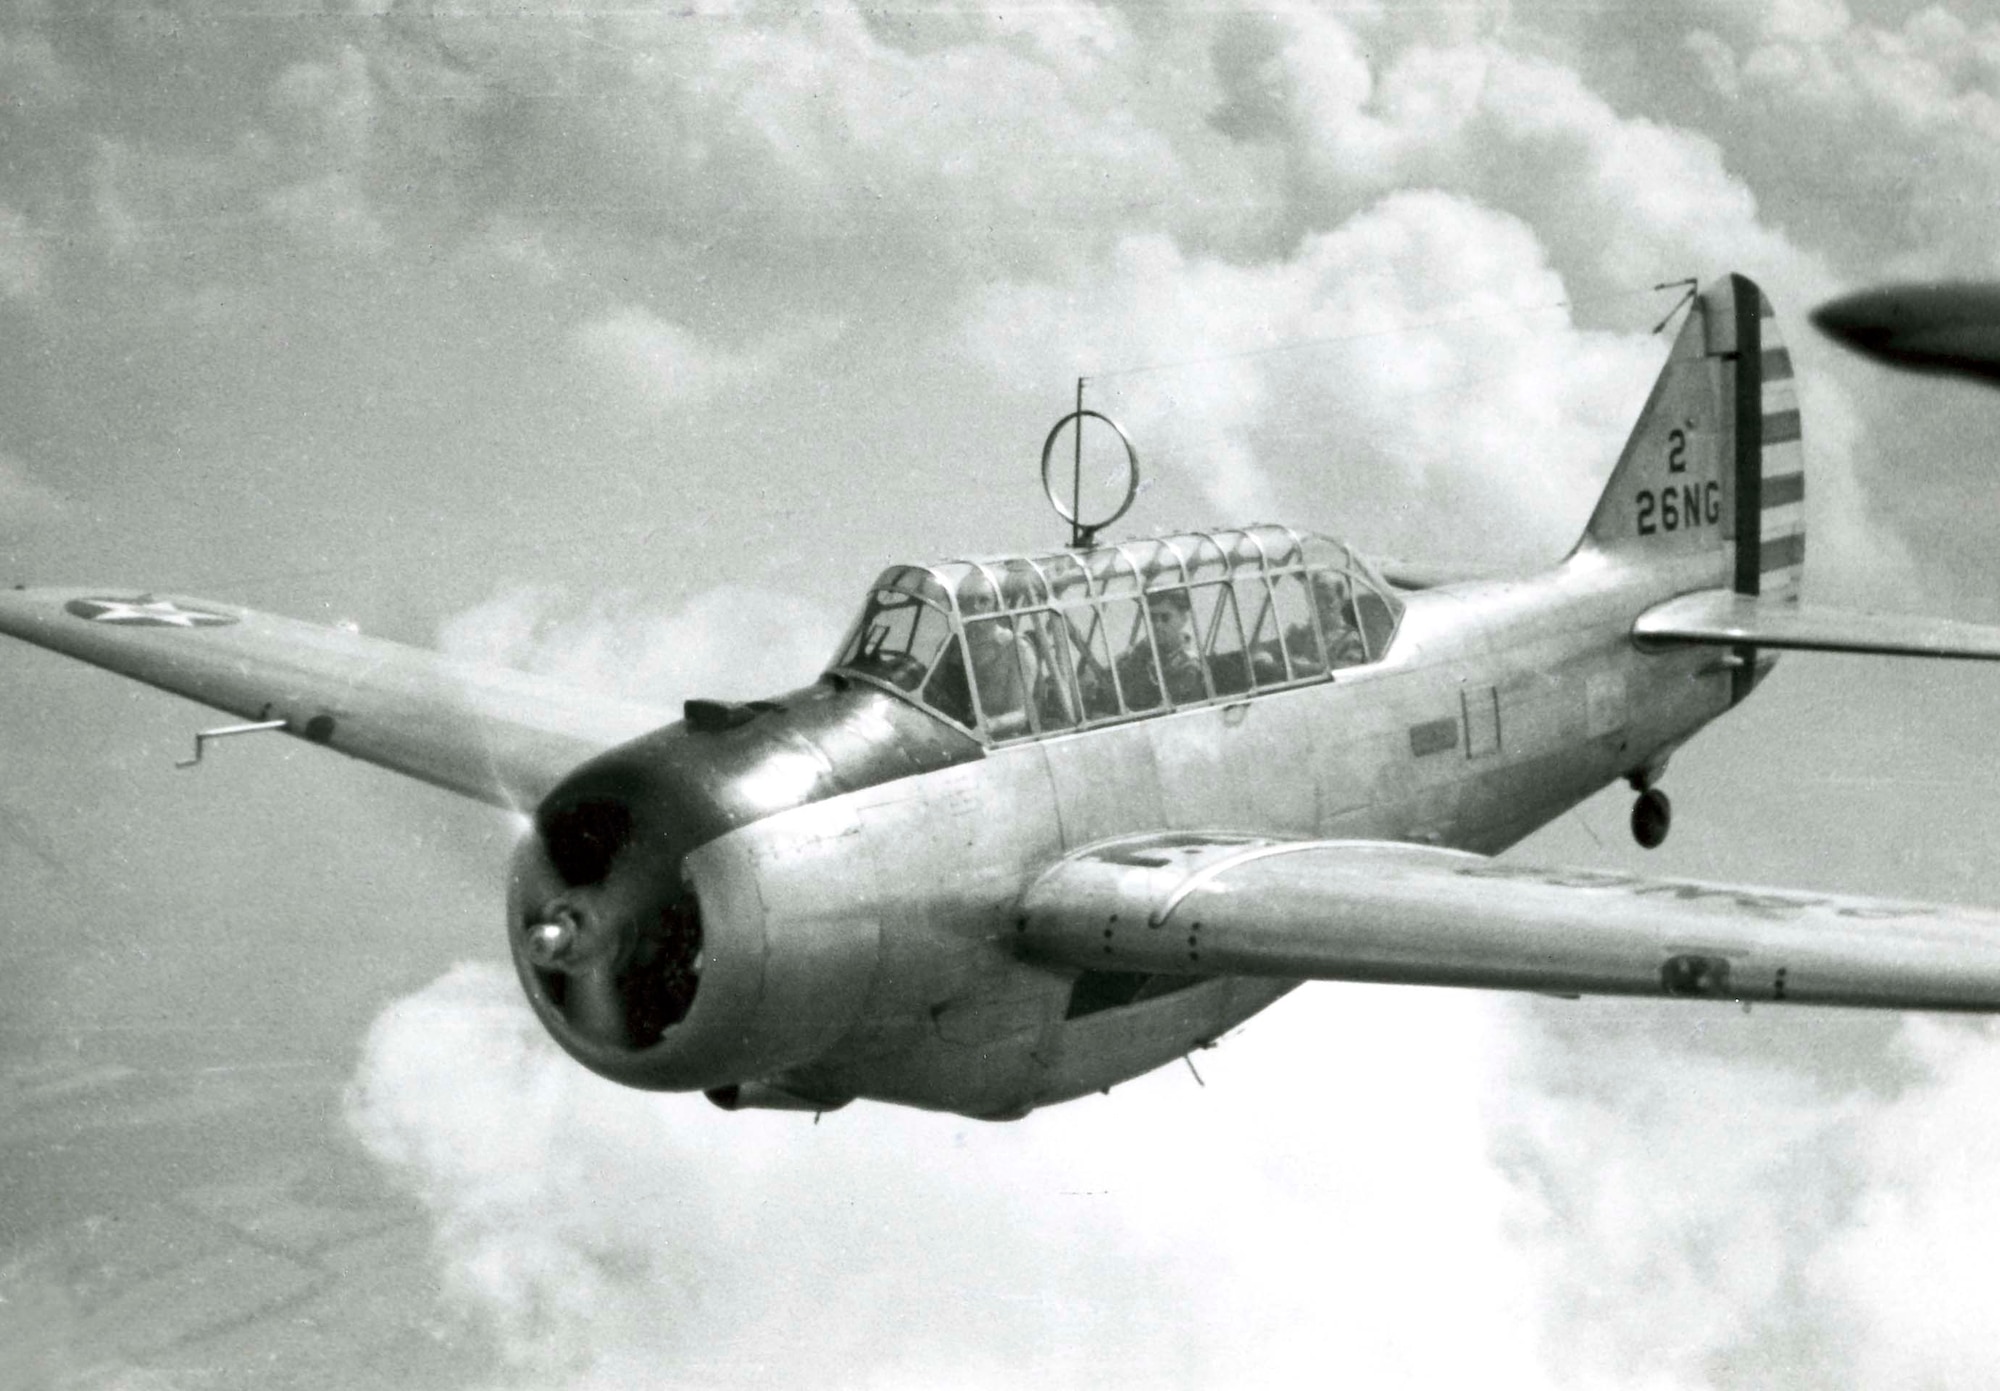 OA-47 observation/patrol aircraft. A pre-World War II design, it was suceeded by the
O-52.